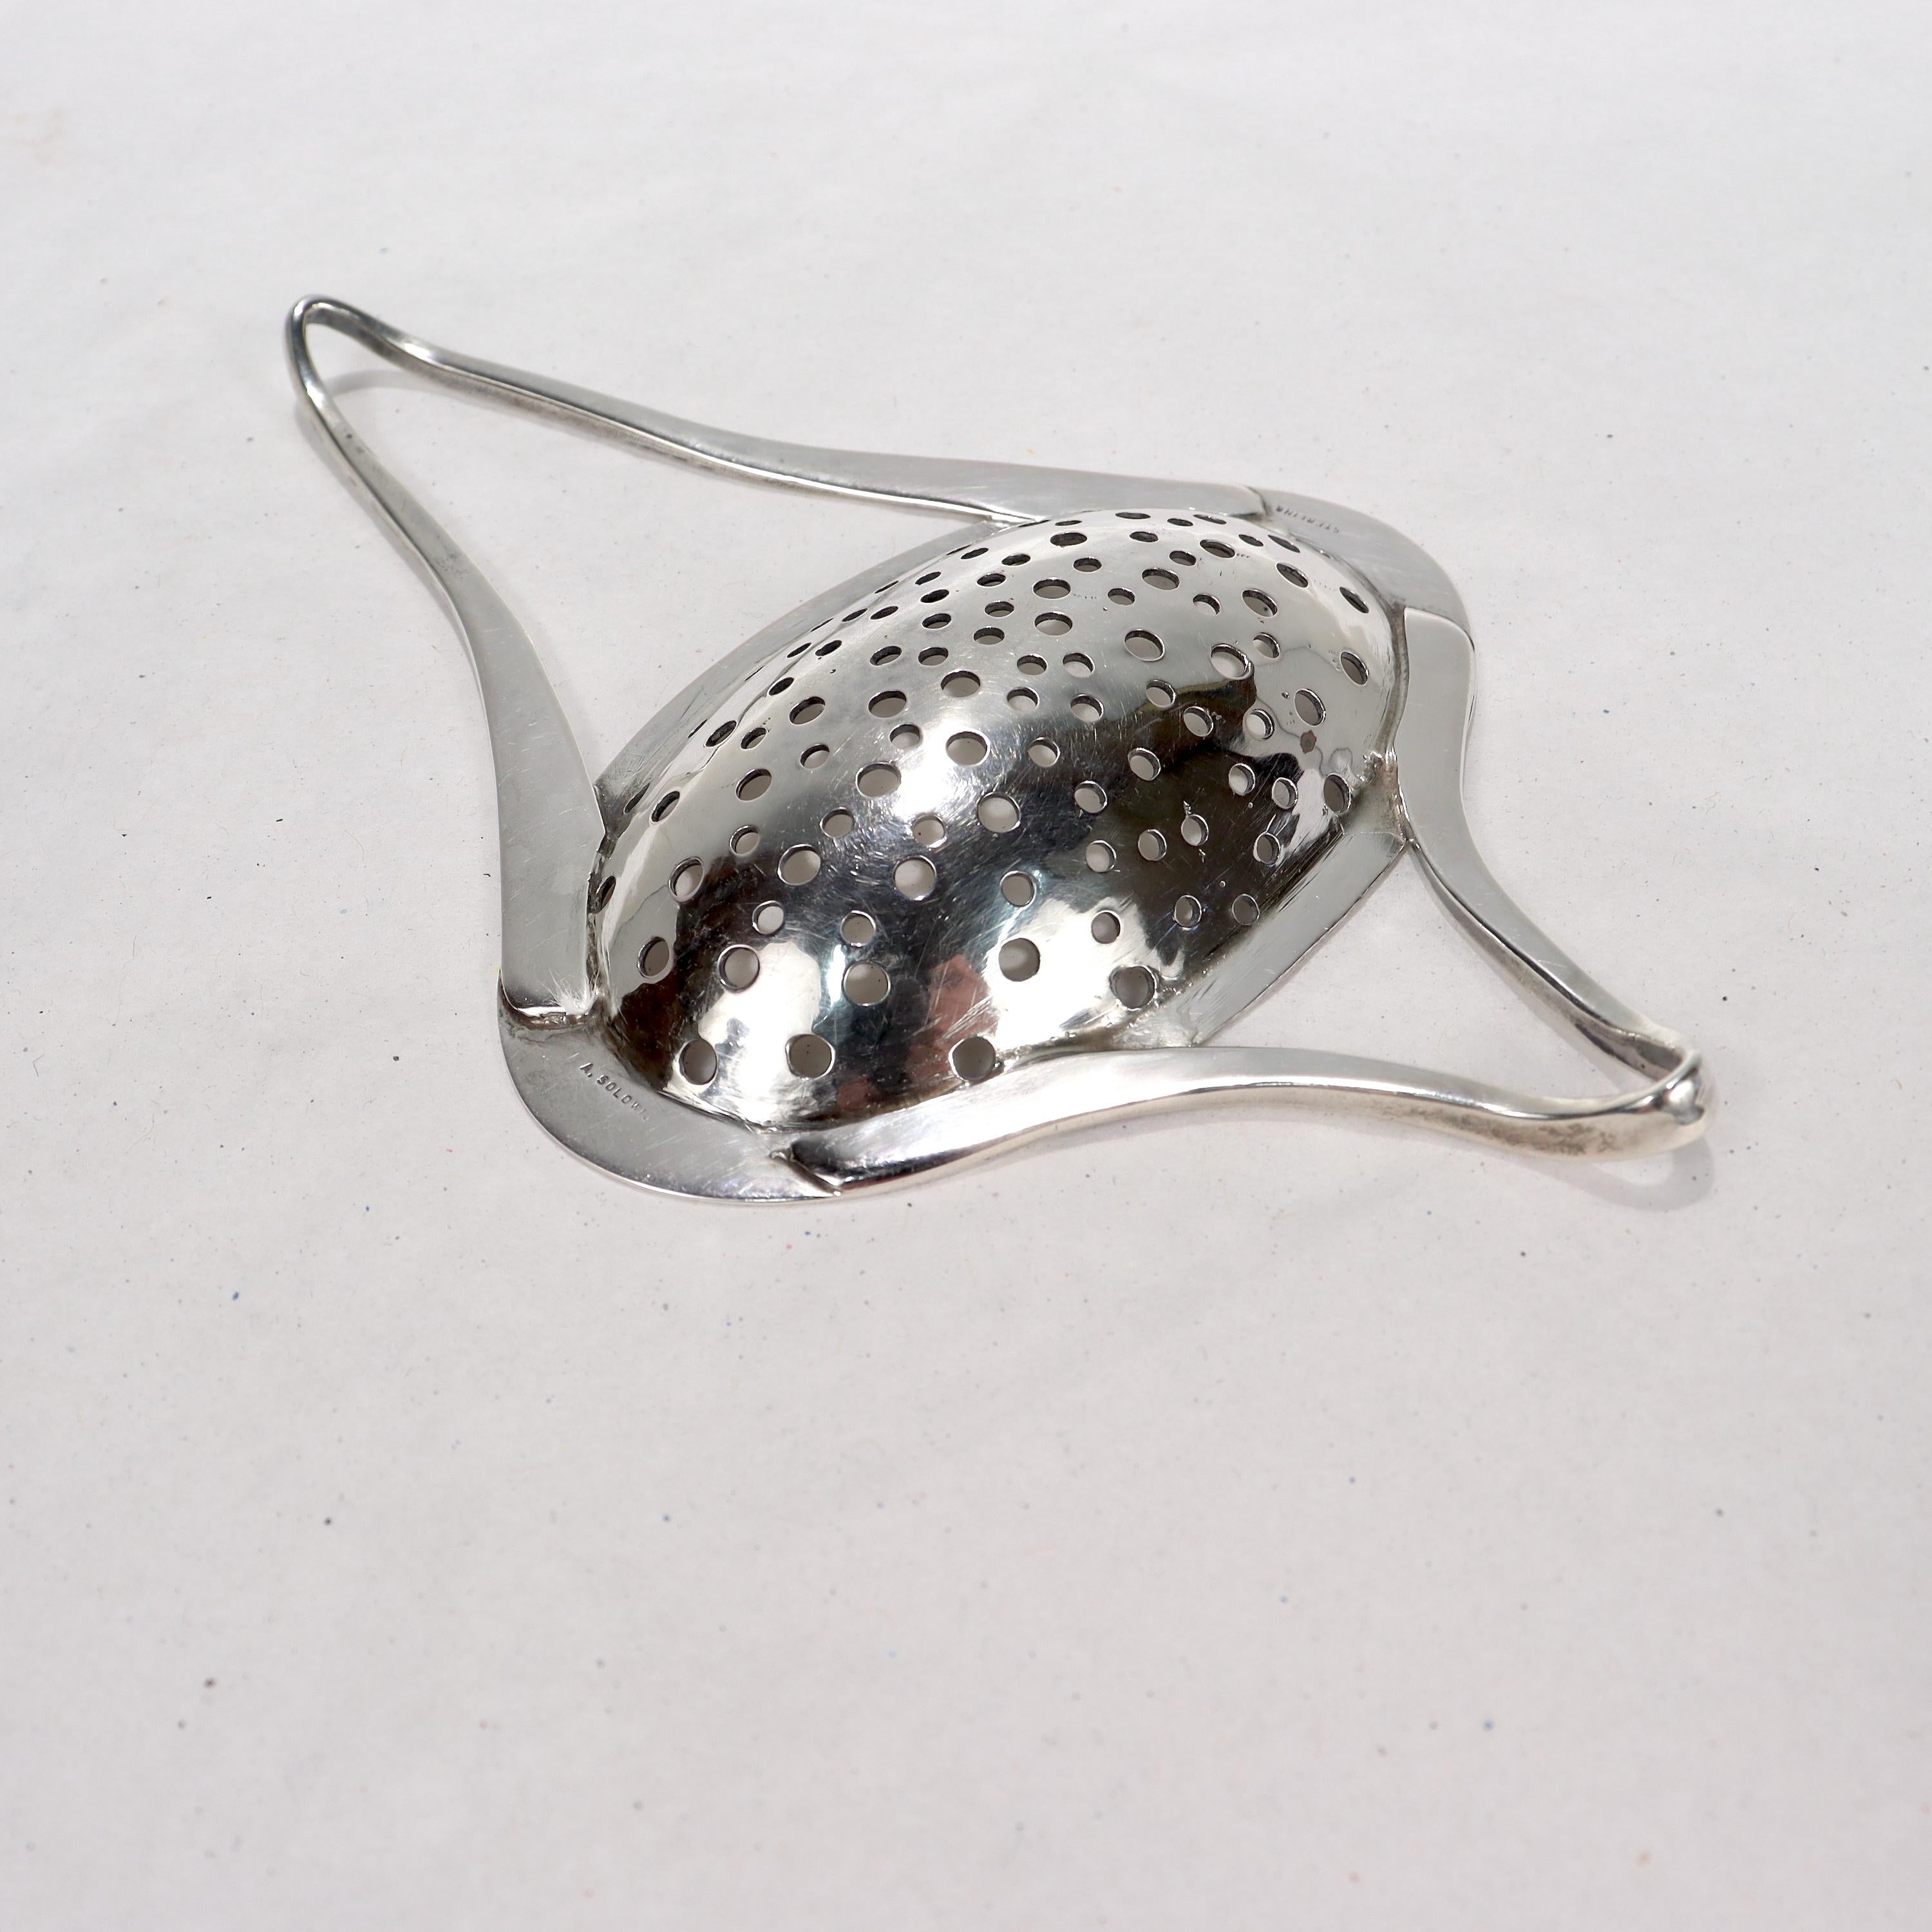 Alexandra Solowij Watkins Modernist Sterling Silver Tea or Cocktail Strainer In Good Condition For Sale In Philadelphia, PA